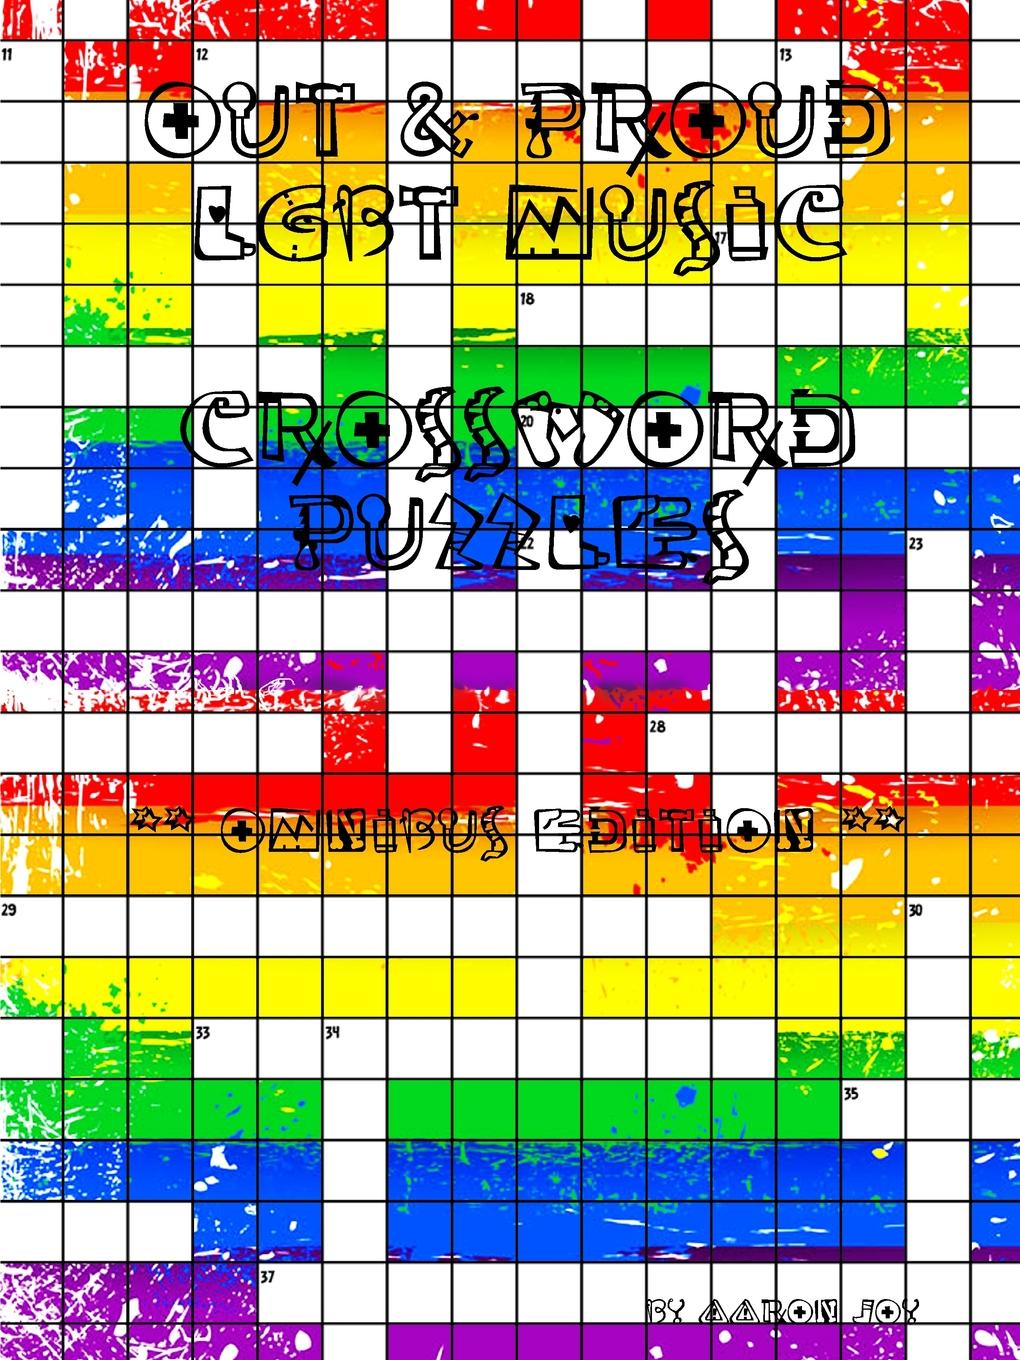 OUT . PROUD LGBT MUSIC CROSSWORD PUZZLES. OMNIBUS EDITION